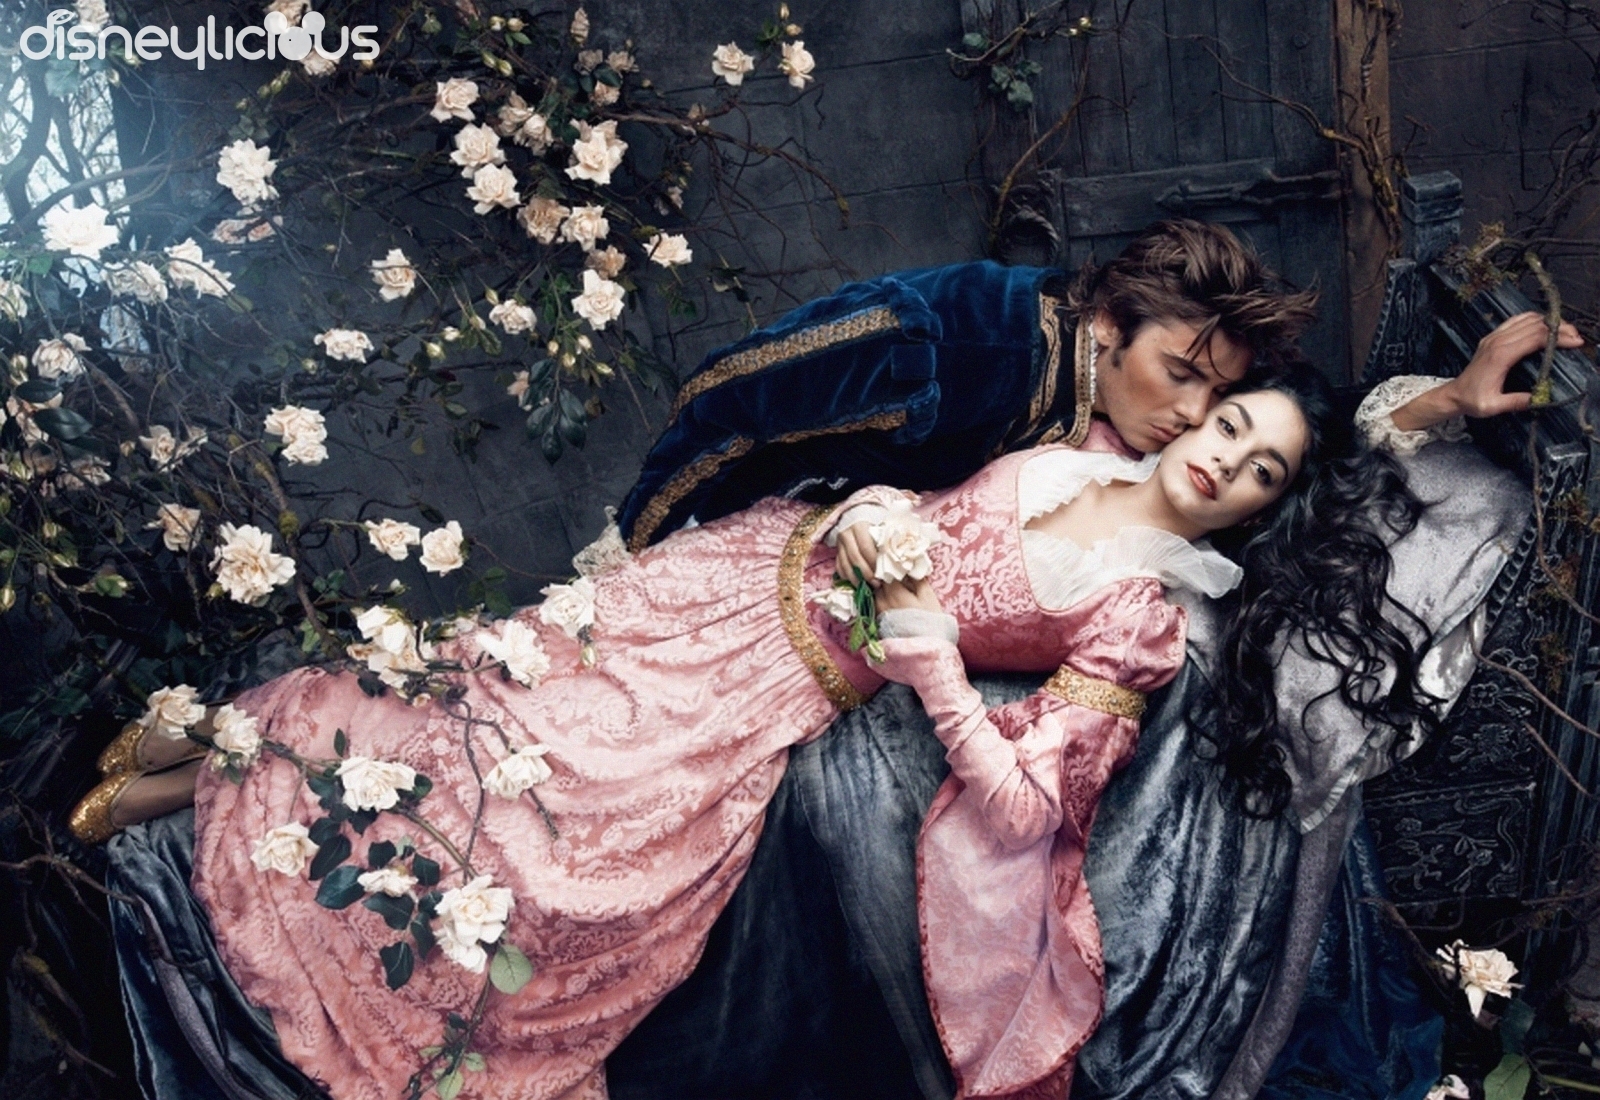 new news 2012: Annie Leibovitz Shoots Celebs as Disney Characters